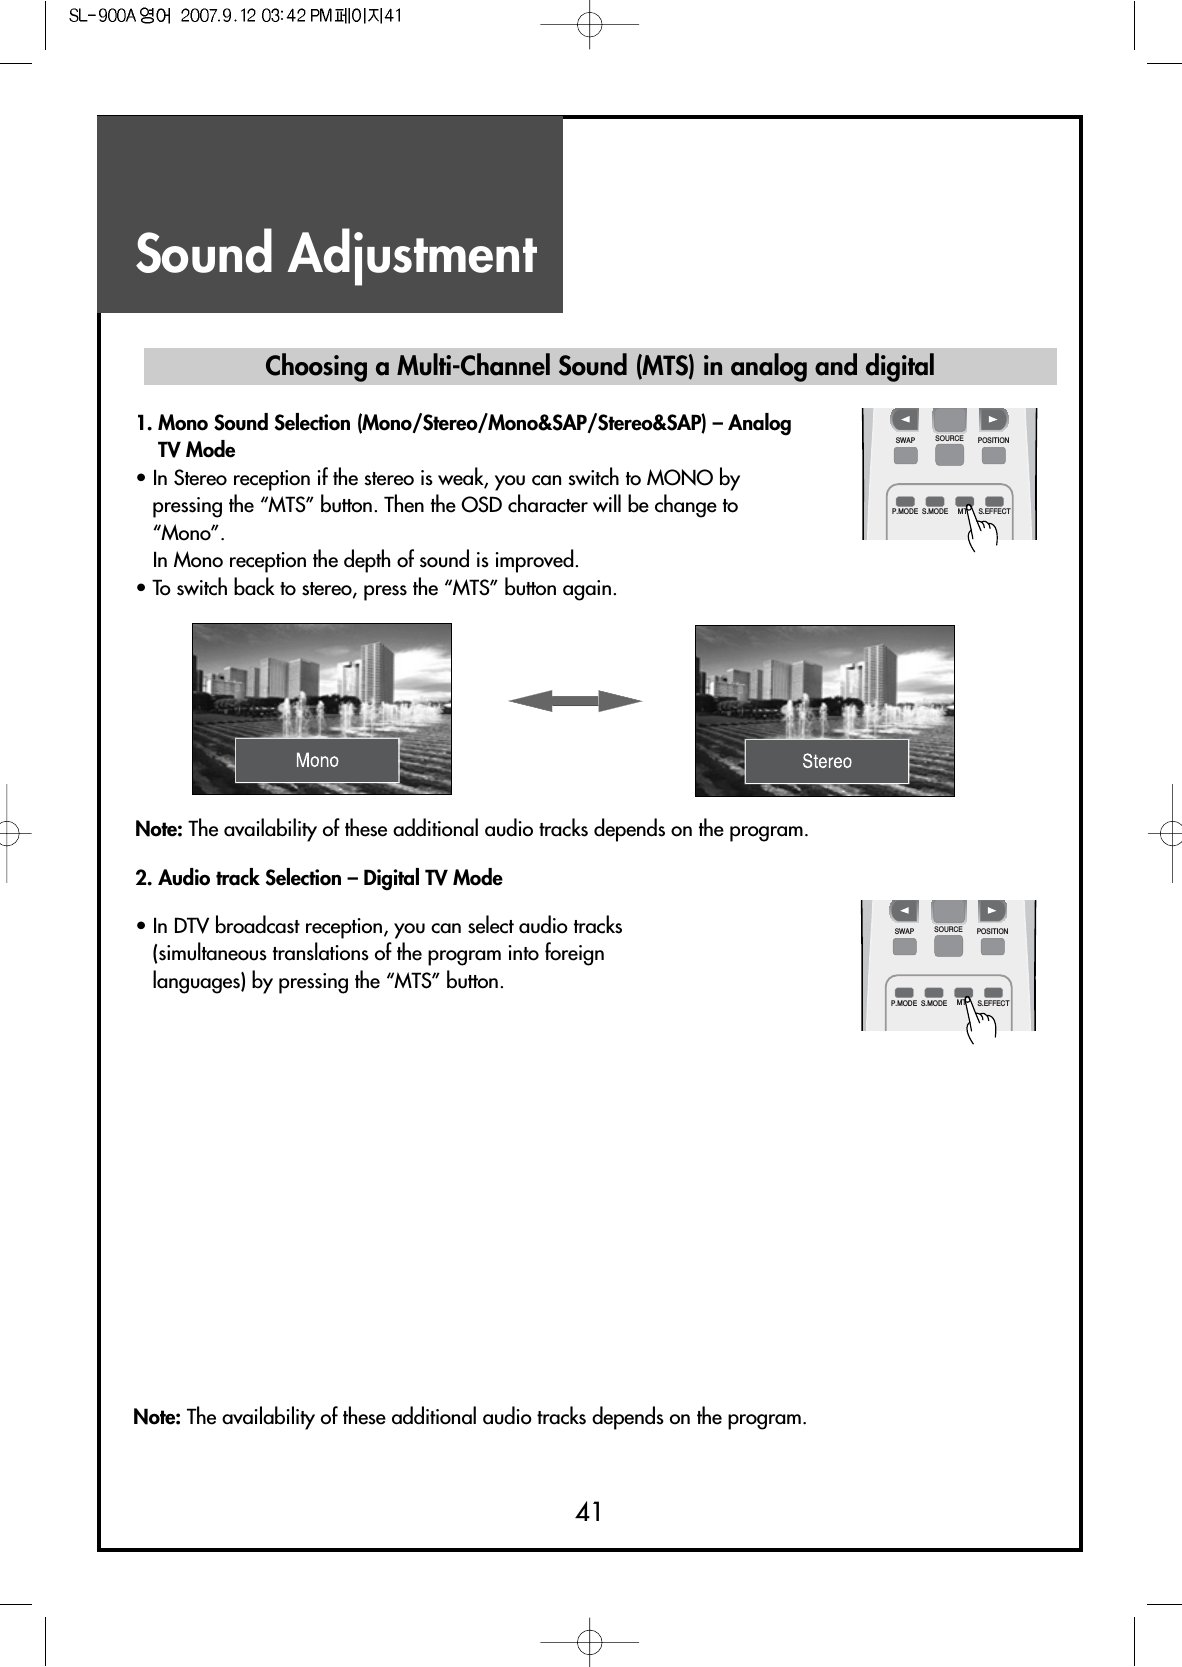 Sound Adjustment41Note: The availability of these additional audio tracks depends on the program.• In DTV broadcast reception, you can select audio tracks(simultaneous translations of the program into foreignlanguages) by pressing the “MTS” button.Choosing a Multi-Channel Sound (MTS) in analog and digital1. Mono Sound Selection (Mono/Stereo/Mono&amp;SAP/Stereo&amp;SAP) – AnalogTV Mode• In Stereo reception if the stereo is weak, you can switch to MONO bypressing the “MTS” button. Then the OSD character will be change to“Mono”.In Mono reception the depth of sound is improved.• To switch back to stereo, press the “MTS” button again.Note: The availability of these additional audio tracks depends on the program.2. Audio track Selection – Digital TV ModeSWAPP.MODE S.MODE S.EFFECTMTSSOURCE POSITIONSWAPP.MODE S.MODE S.EFFECTMTSSOURCE POSITION